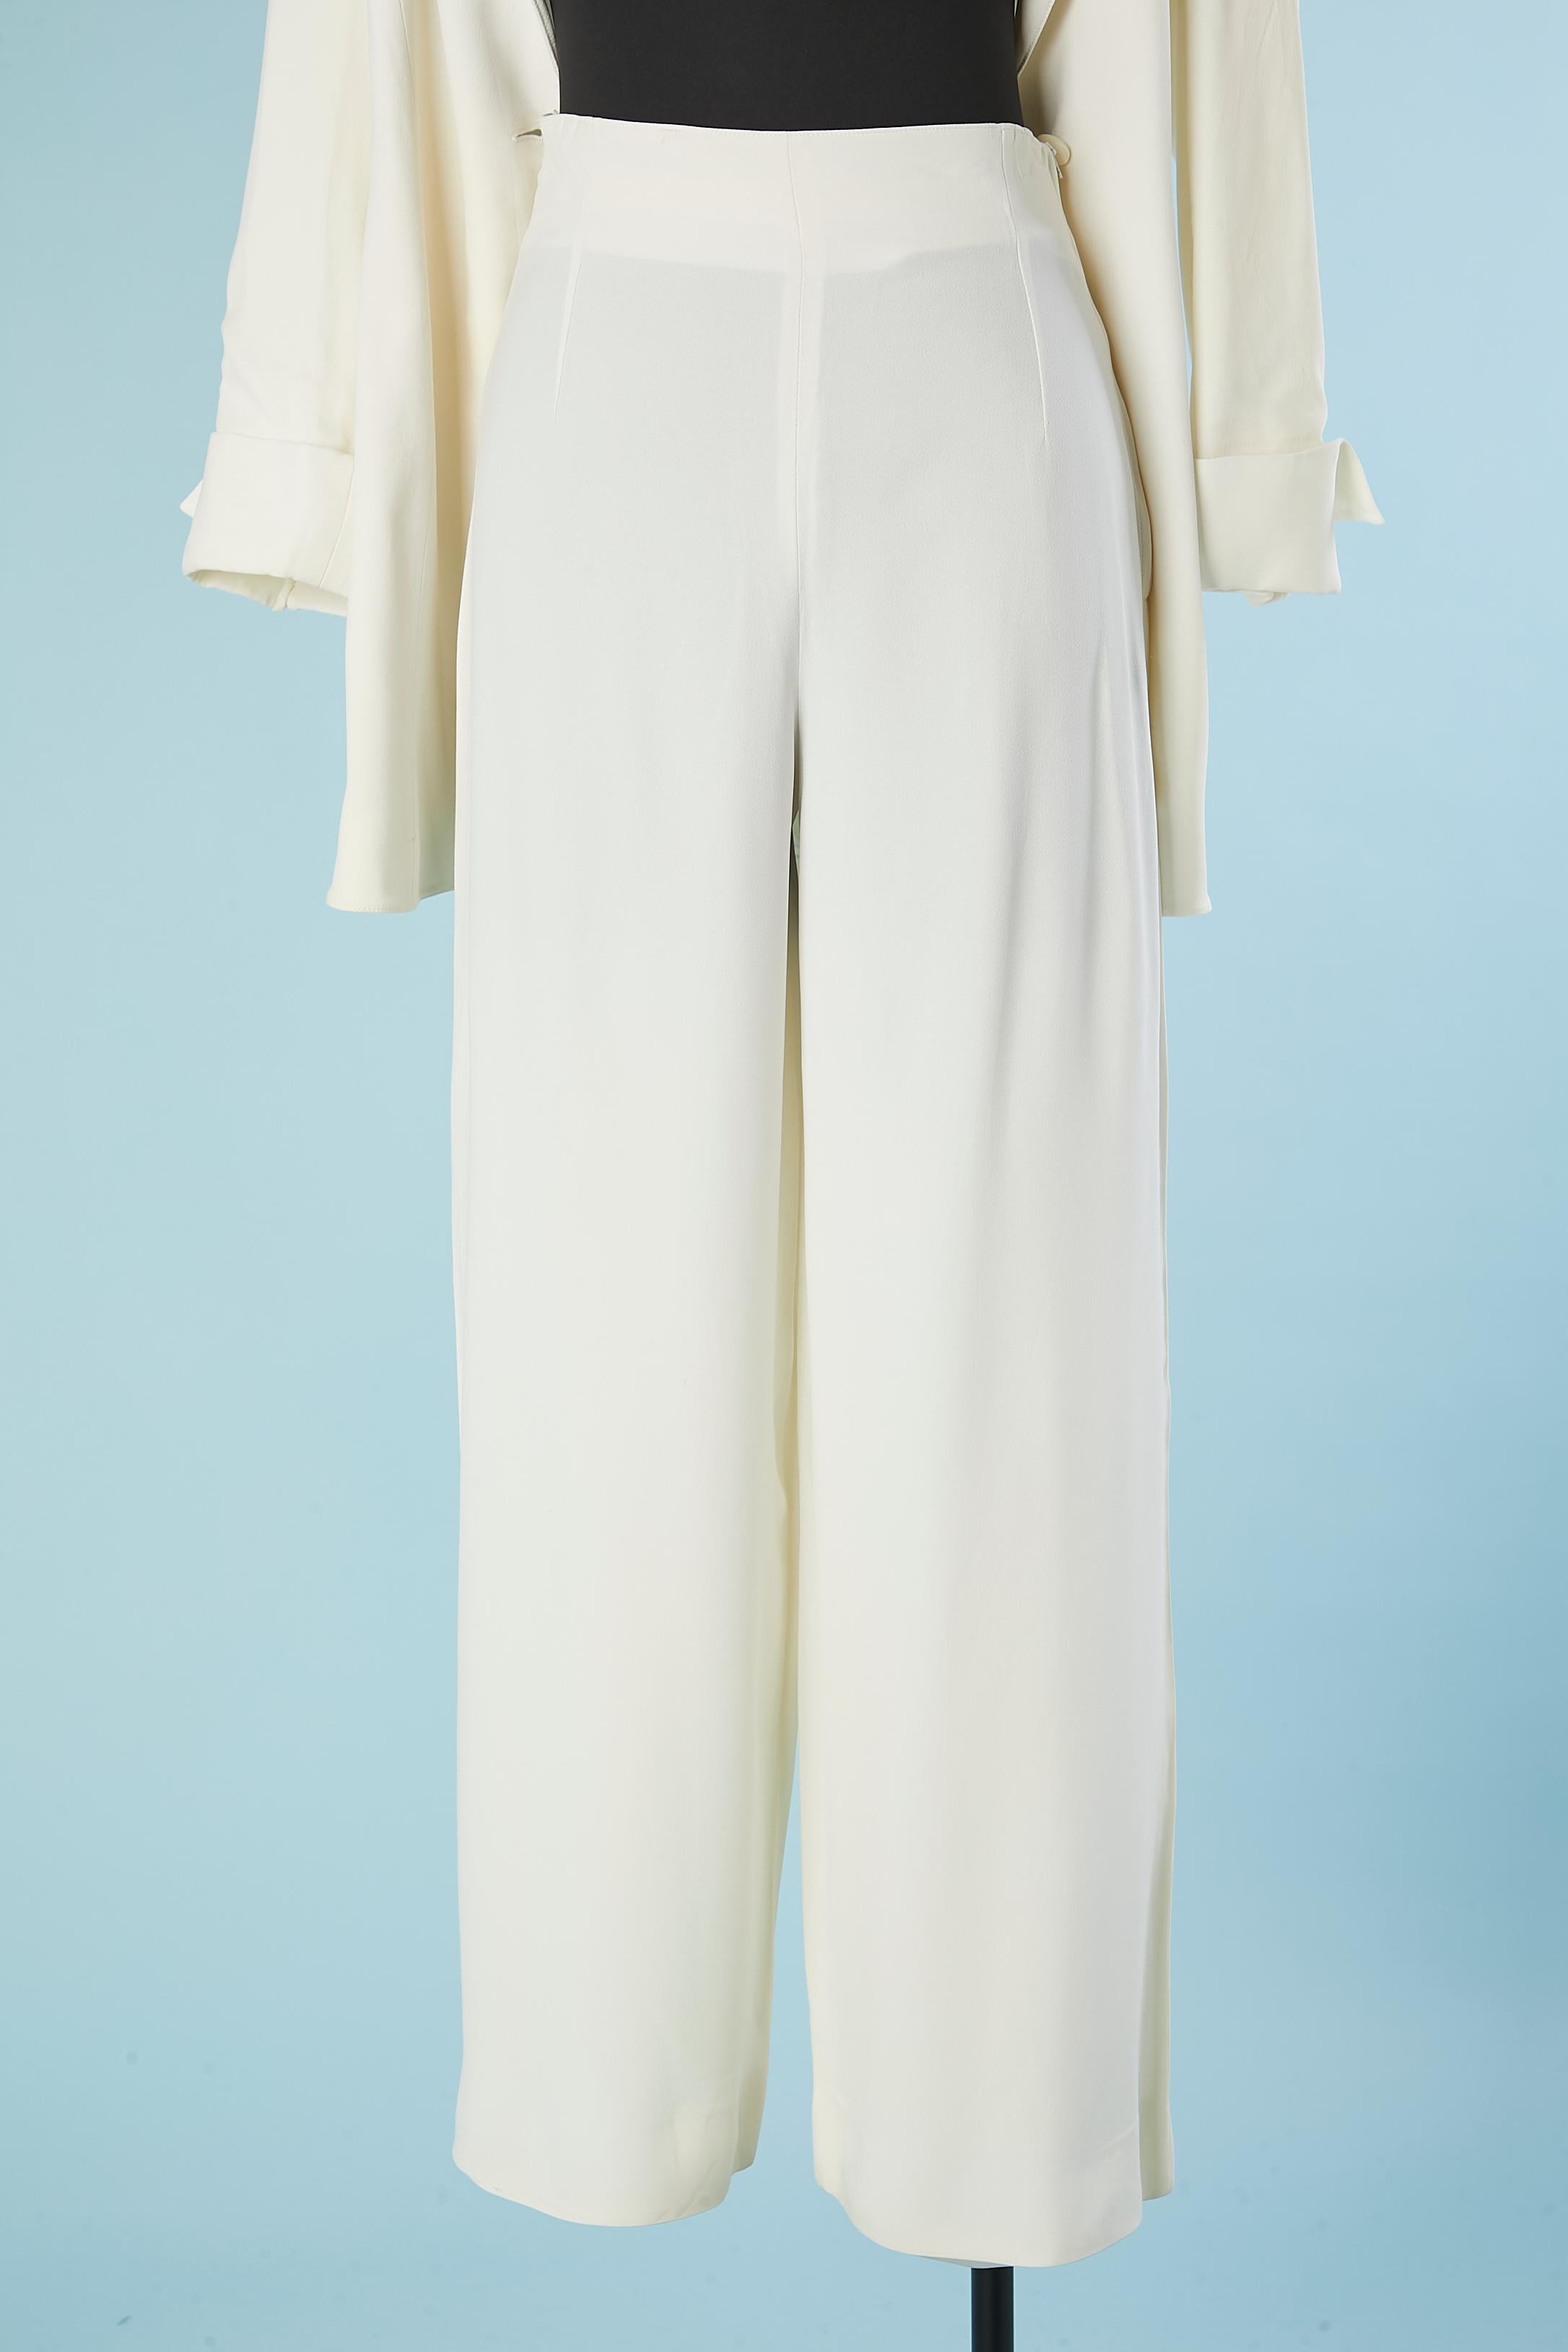 Women's White crêpe trouser-suit State of Claude Montana Circa 1980's  For Sale